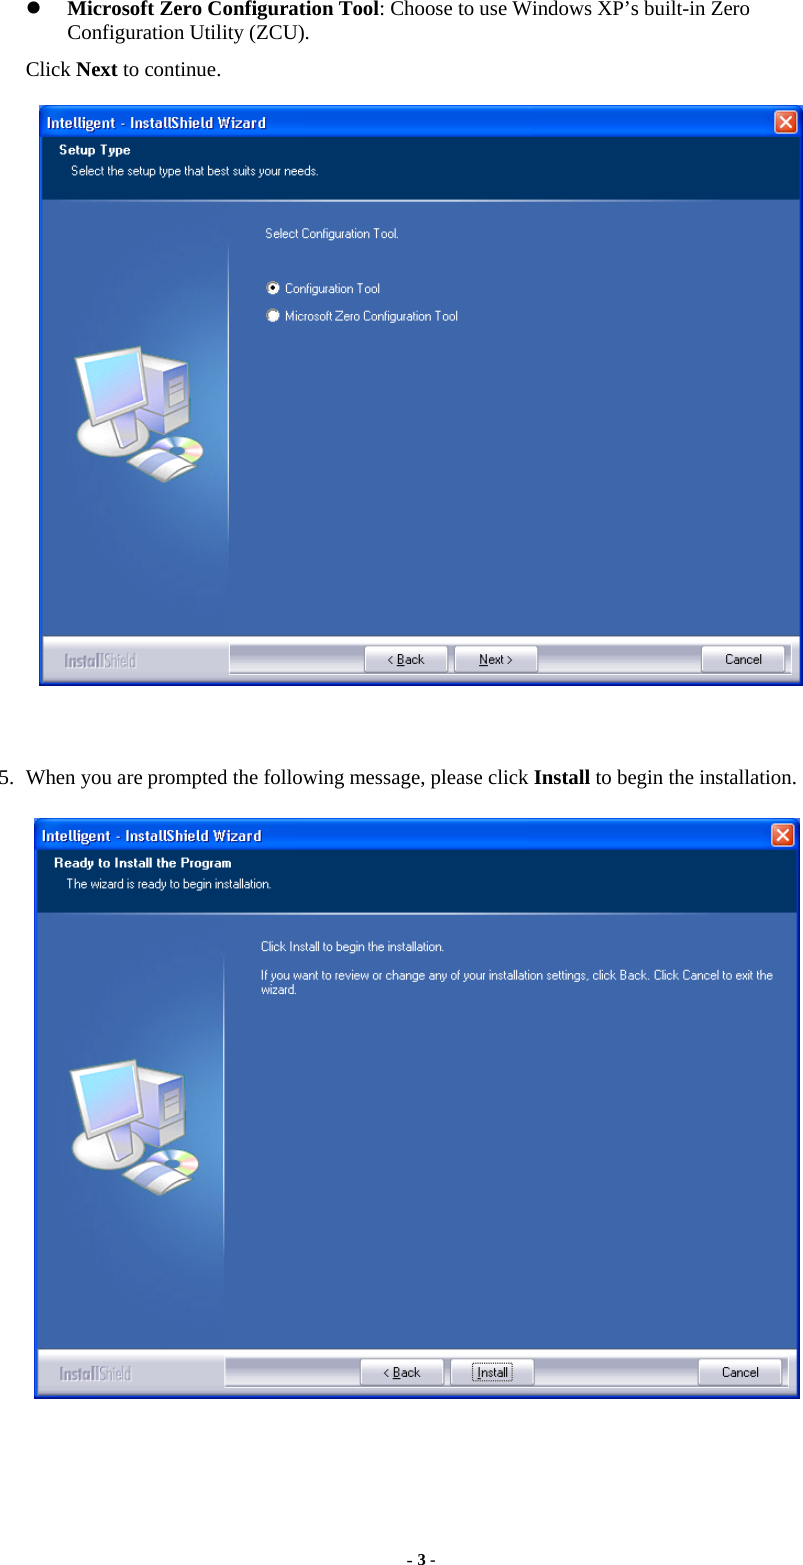  z Microsoft Zero Configuration Tool: Choose to use Windows XP’s built-in Zero Configuration Utility (ZCU). Click Next to continue.   5. When you are prompted the following message, please click Install to begin the installation.  - 3 - 